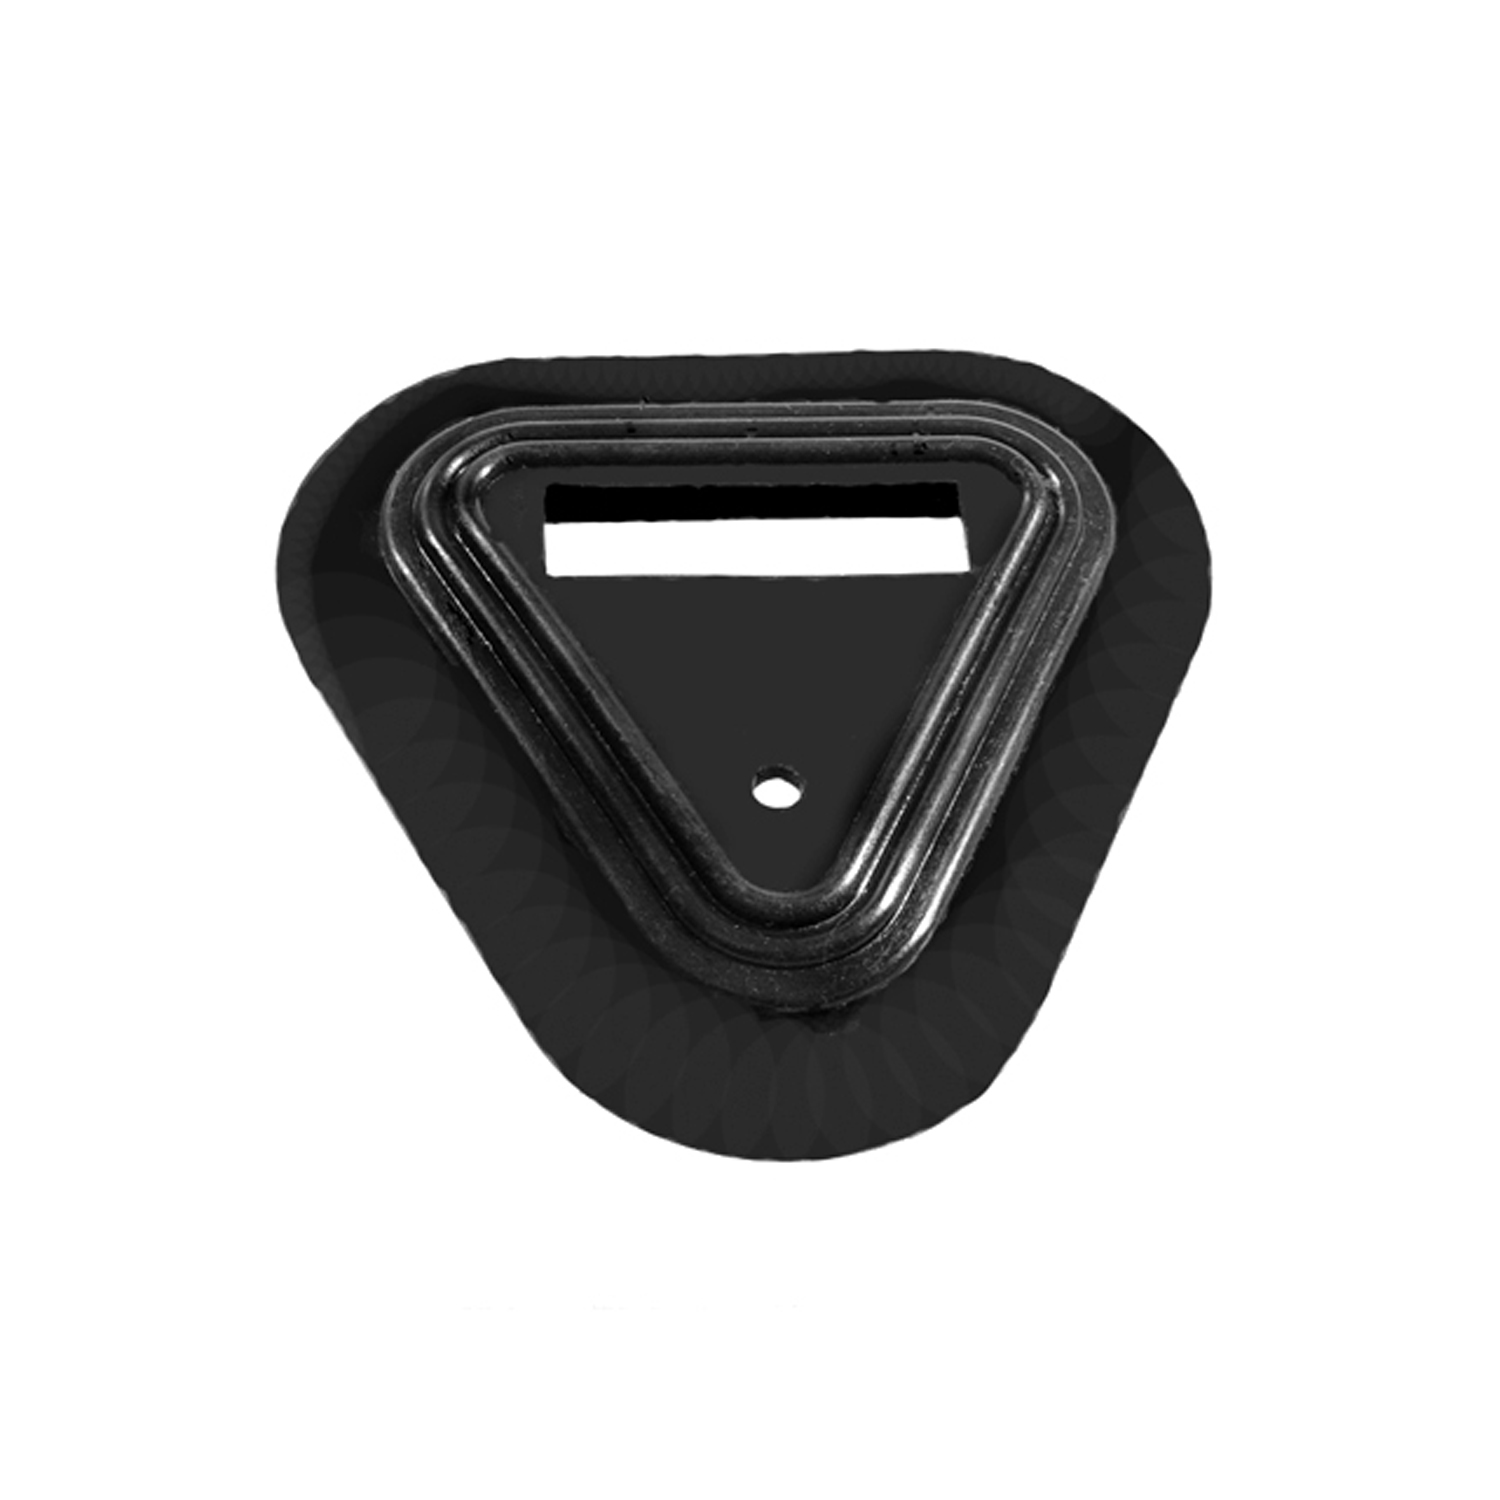 1956 Chevrolet One-Fifty Series Accelerator Pedal Pad Trim Grommet.  Black, Rubber-SM 79-A